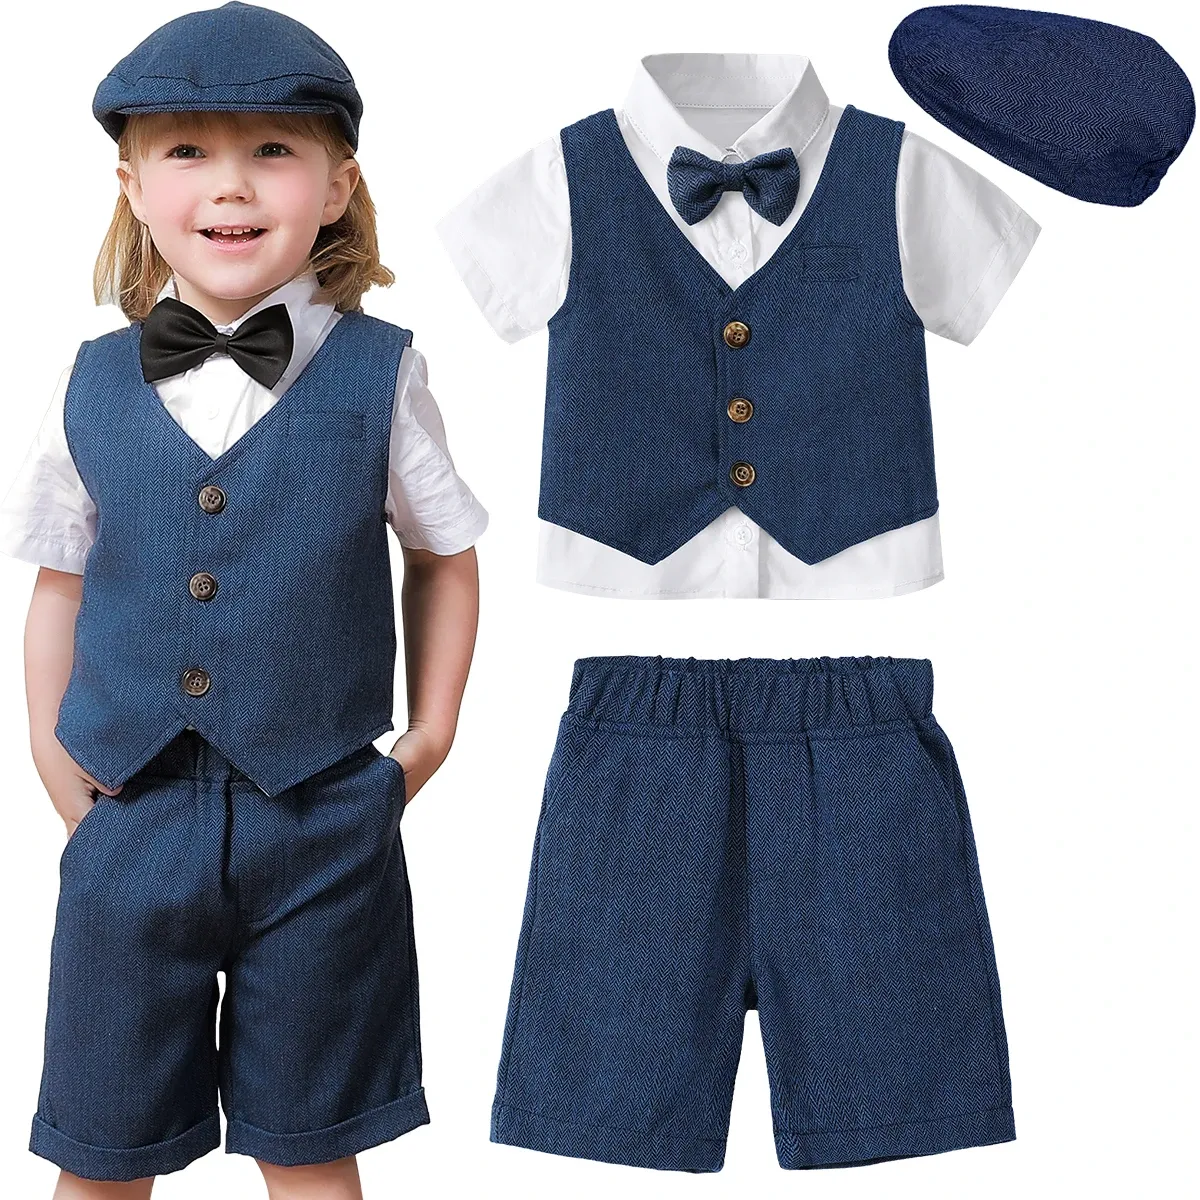 Sets Baby Boy Clothes with Hat Toddler Wedding Suit Set Infant Birthday Party Baptism Outfit Gentleman Formal Short Sleeved 4pcs